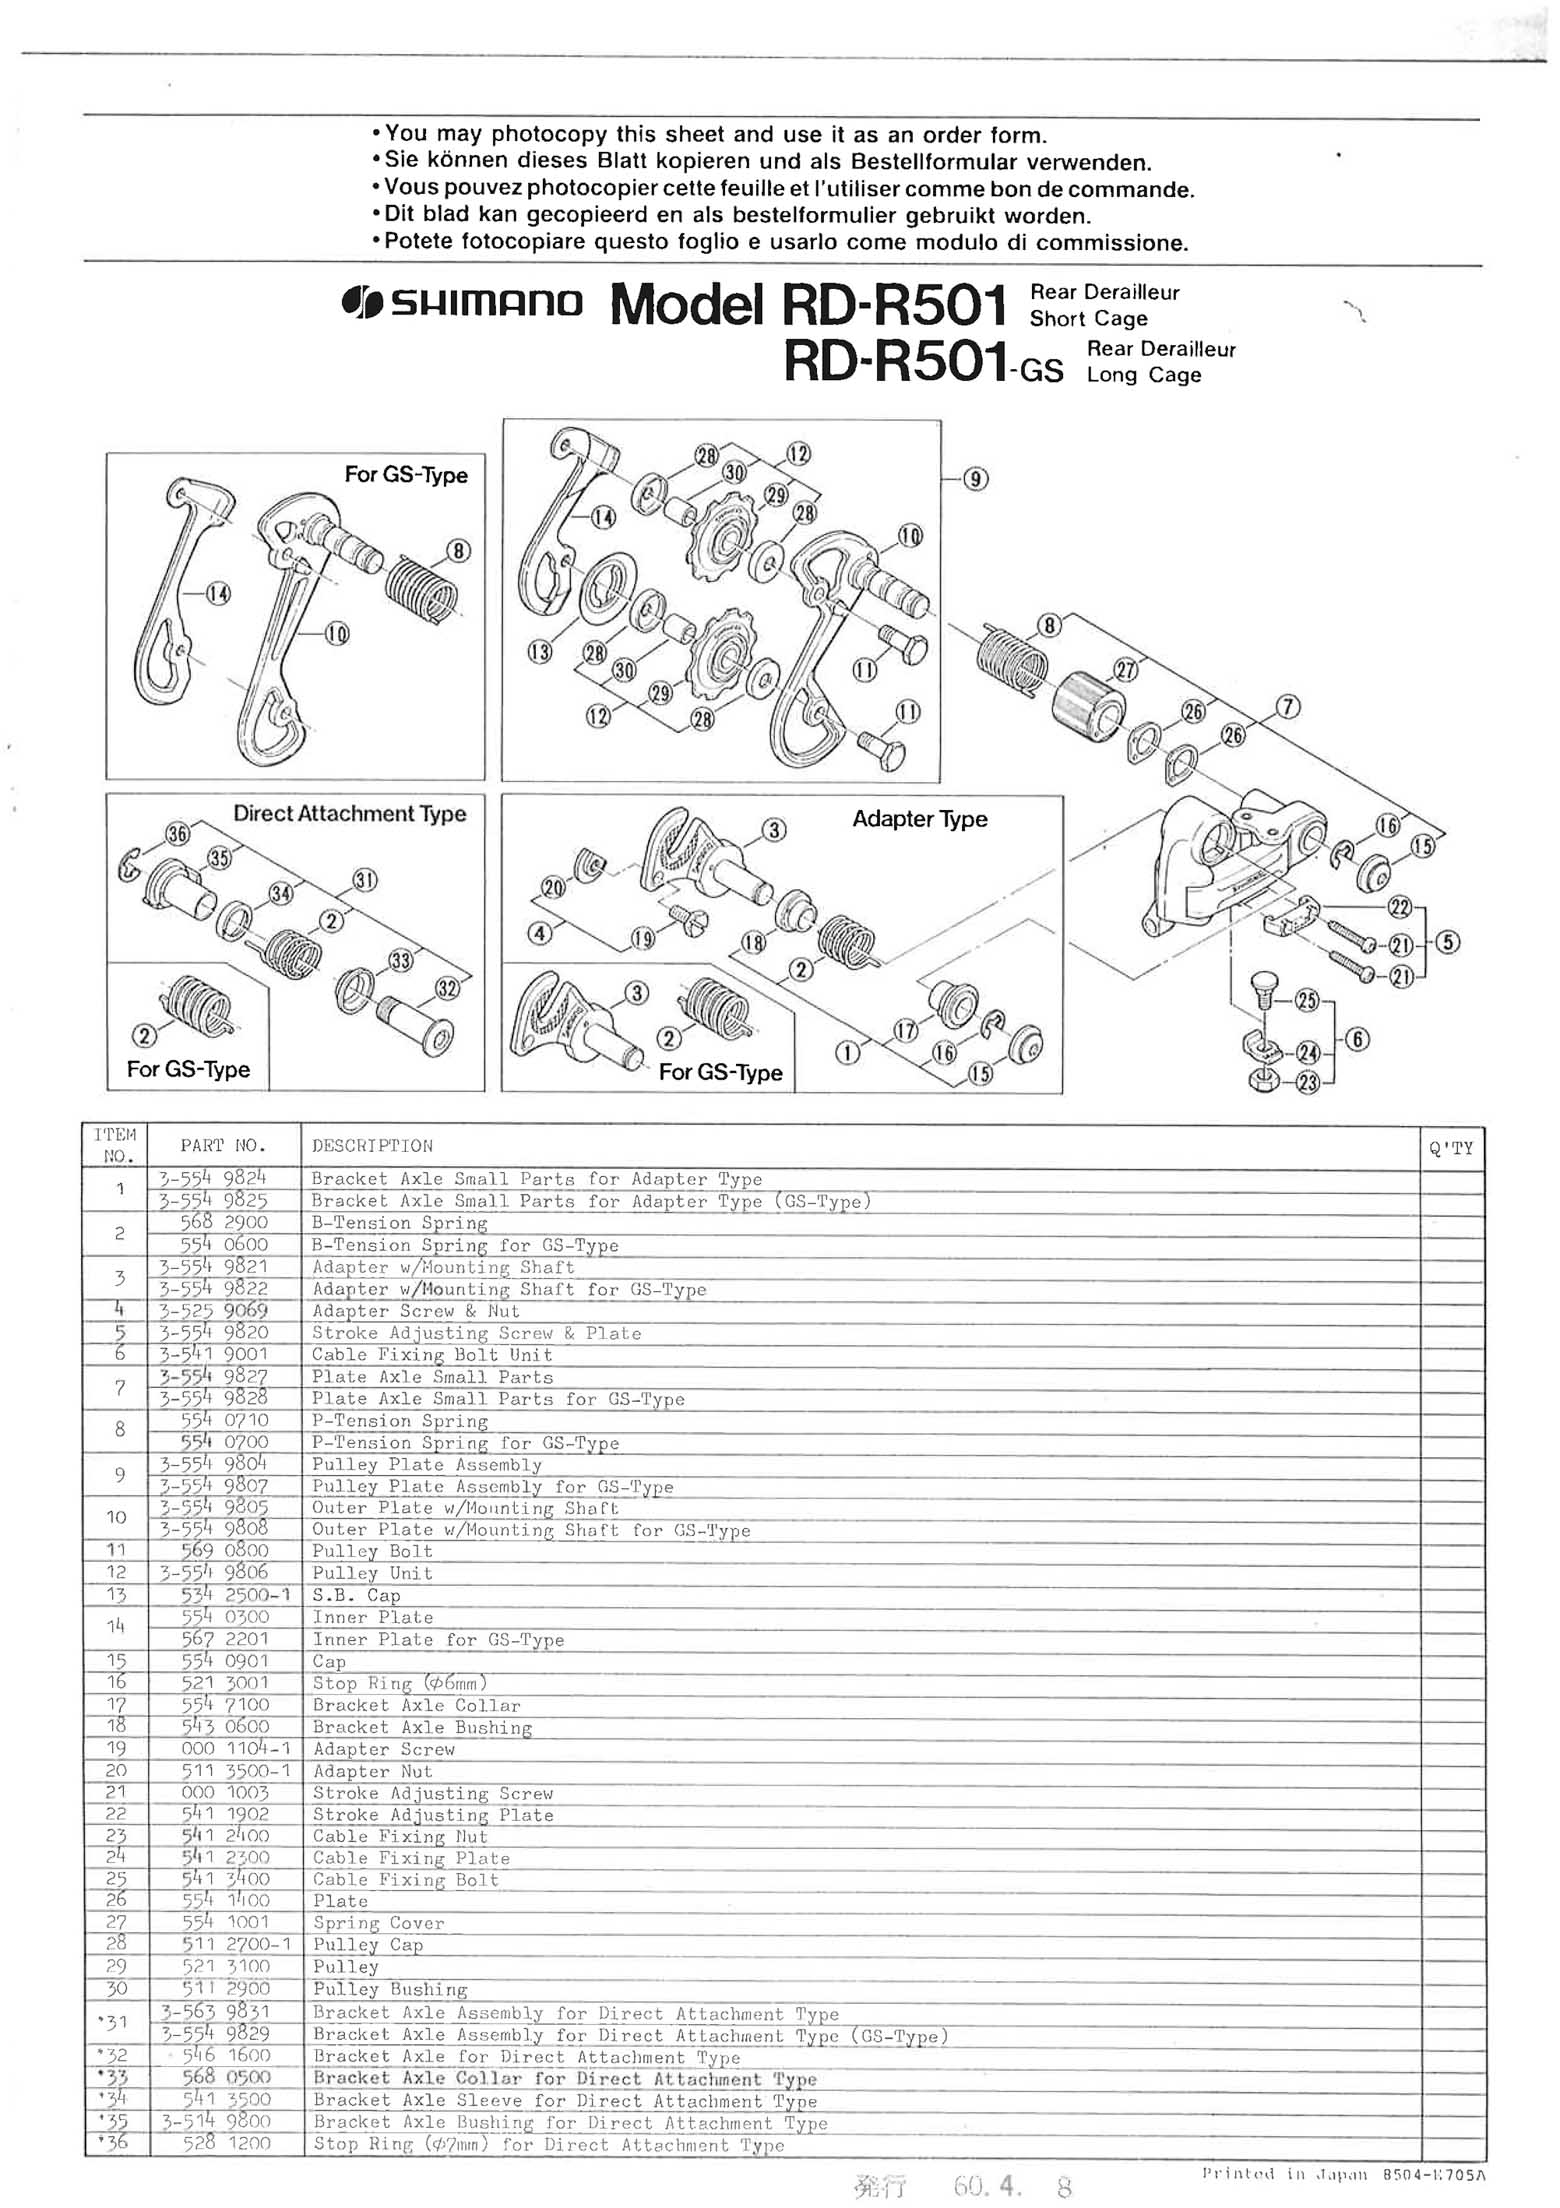 Shimano web site 2020 - exploded views from 1985 R501 series main image